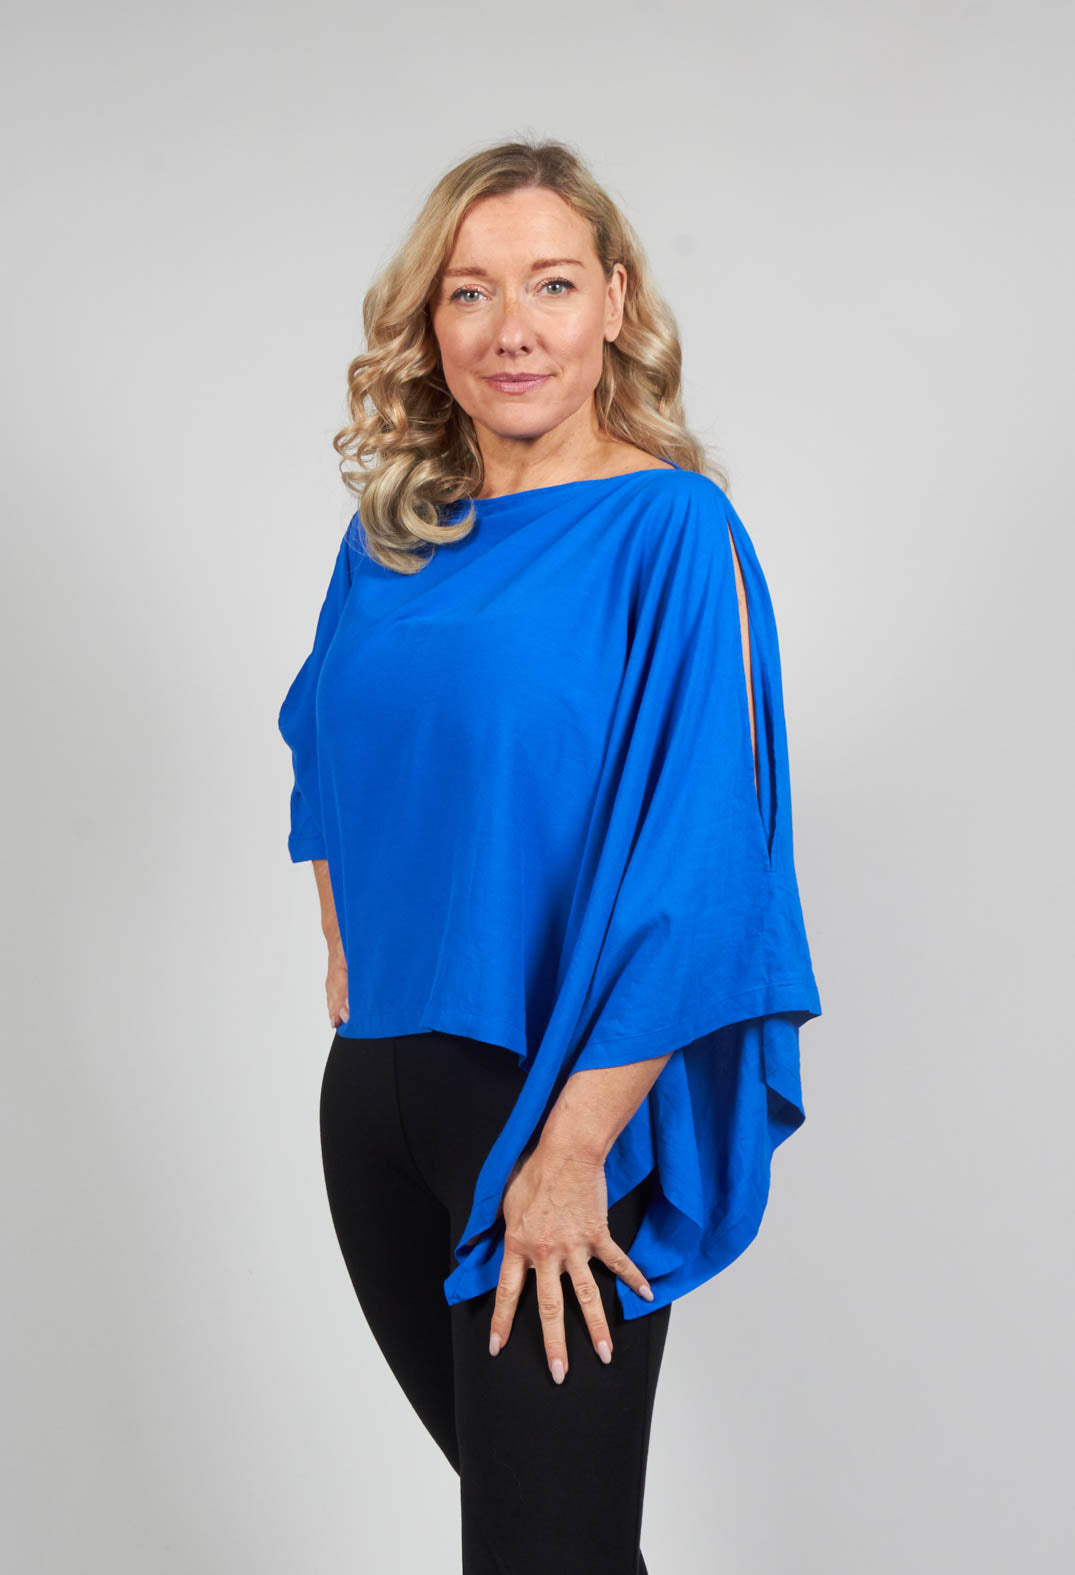 Cropped Cape Style Top with Cut Out Shoulder in Blue